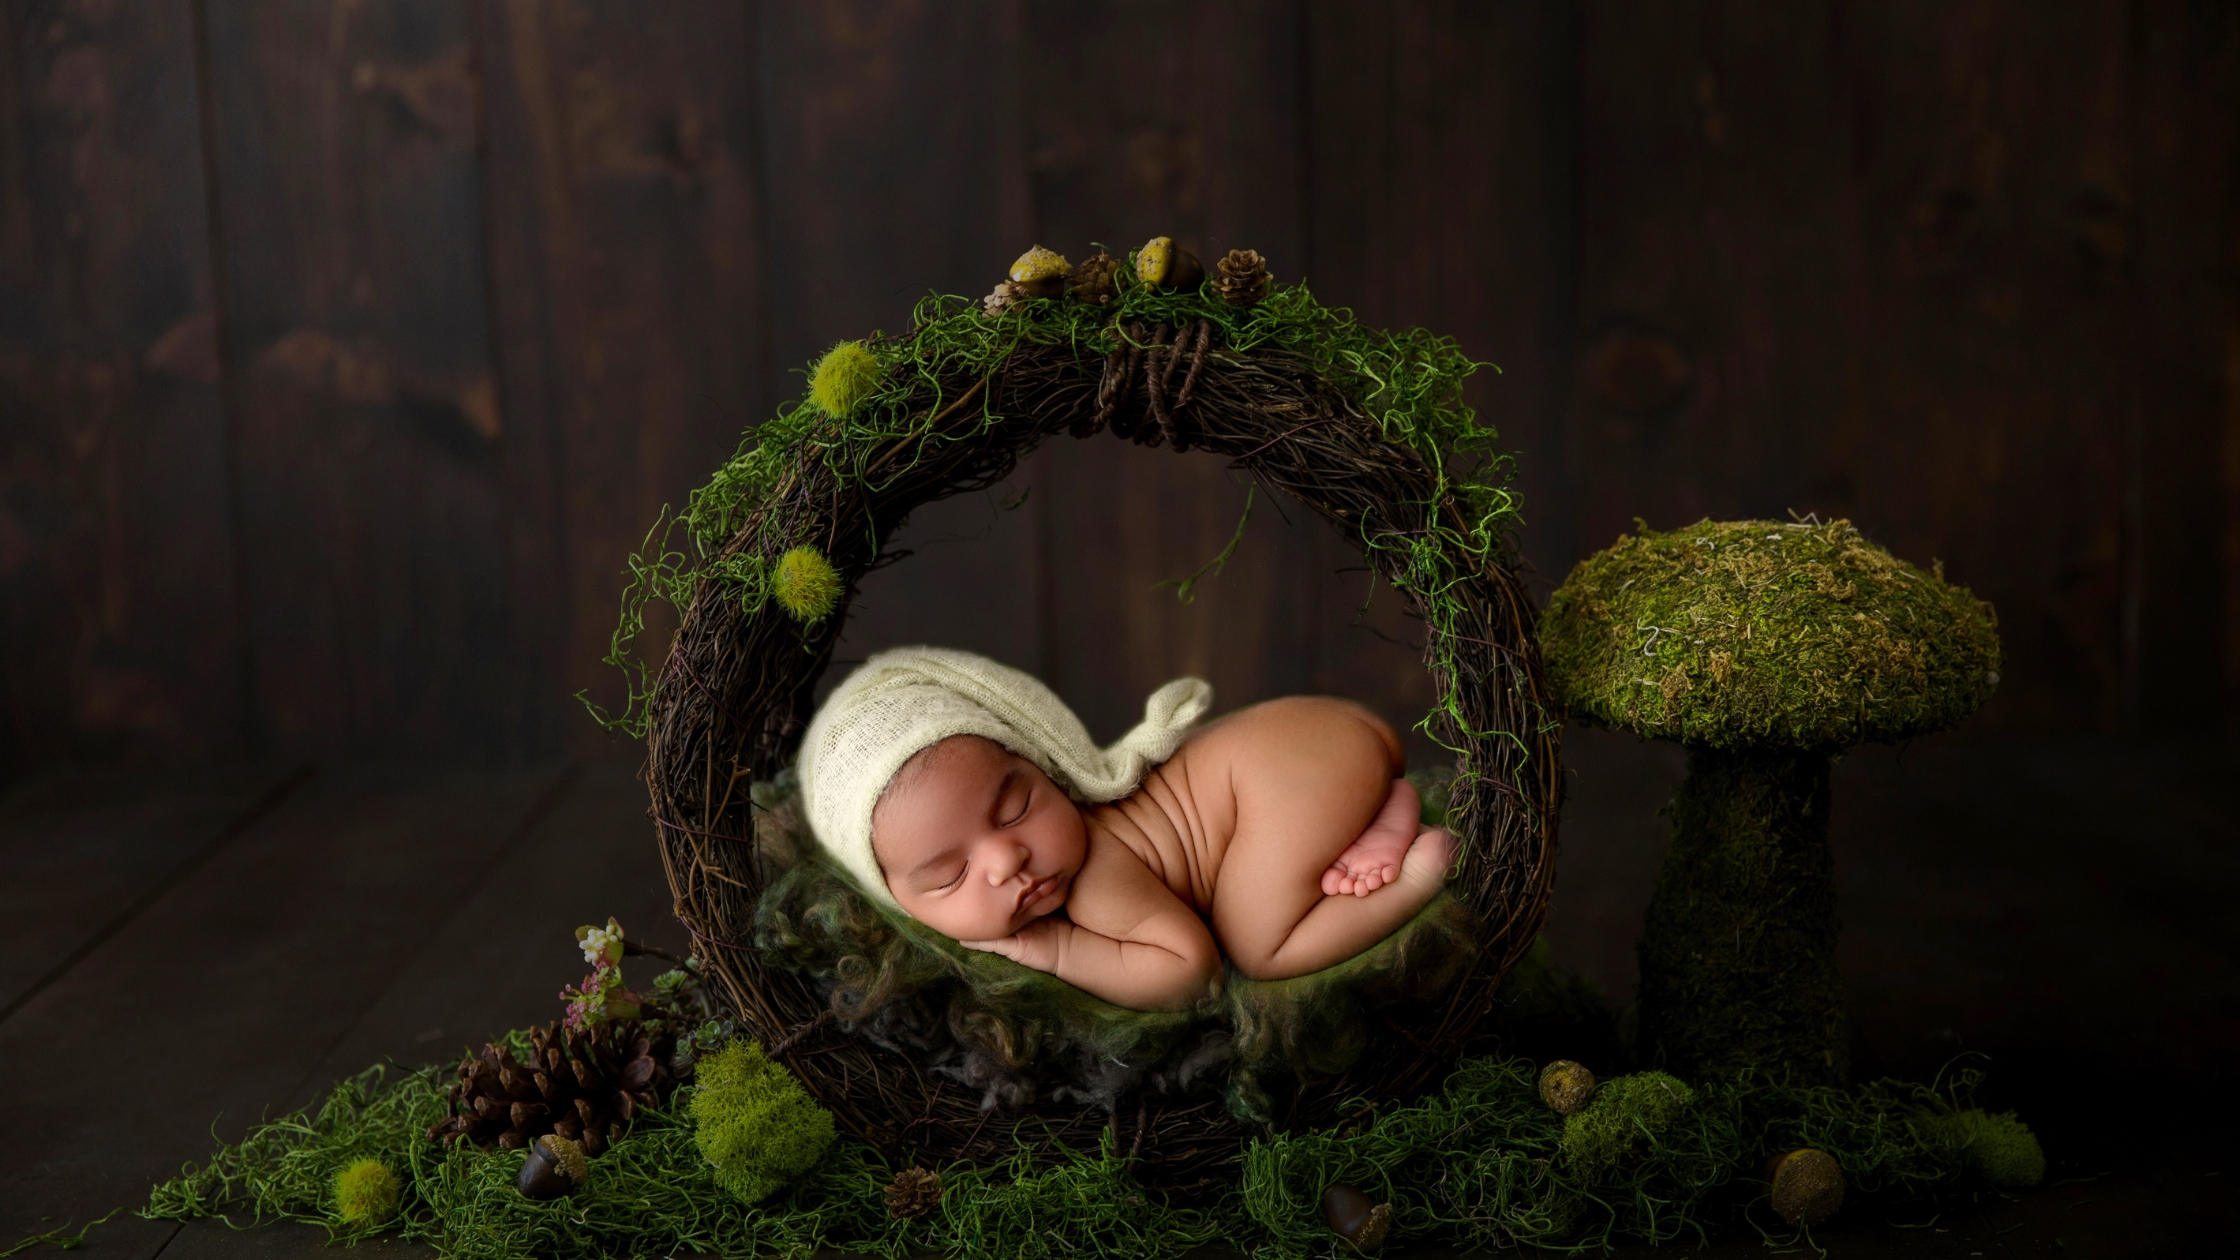 Lil One Photography - Newborn portraits (mossy forest)